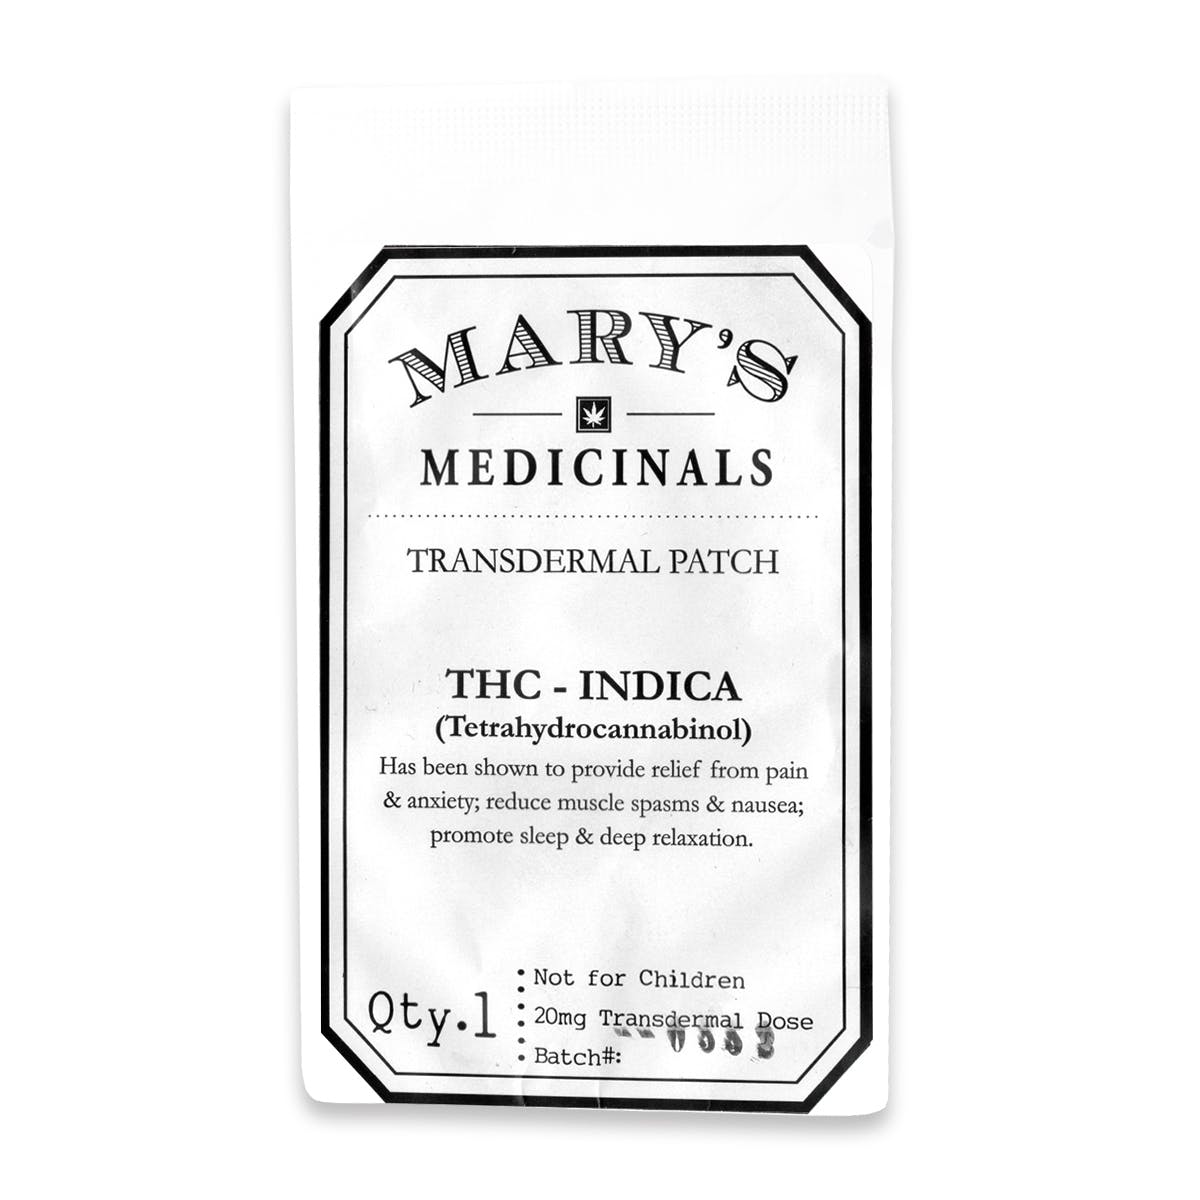 marijuana-dispensaries-southern-maryland-relief-in-mechanicsville-thc-indica-transdermal-patch-2c-20mg-med